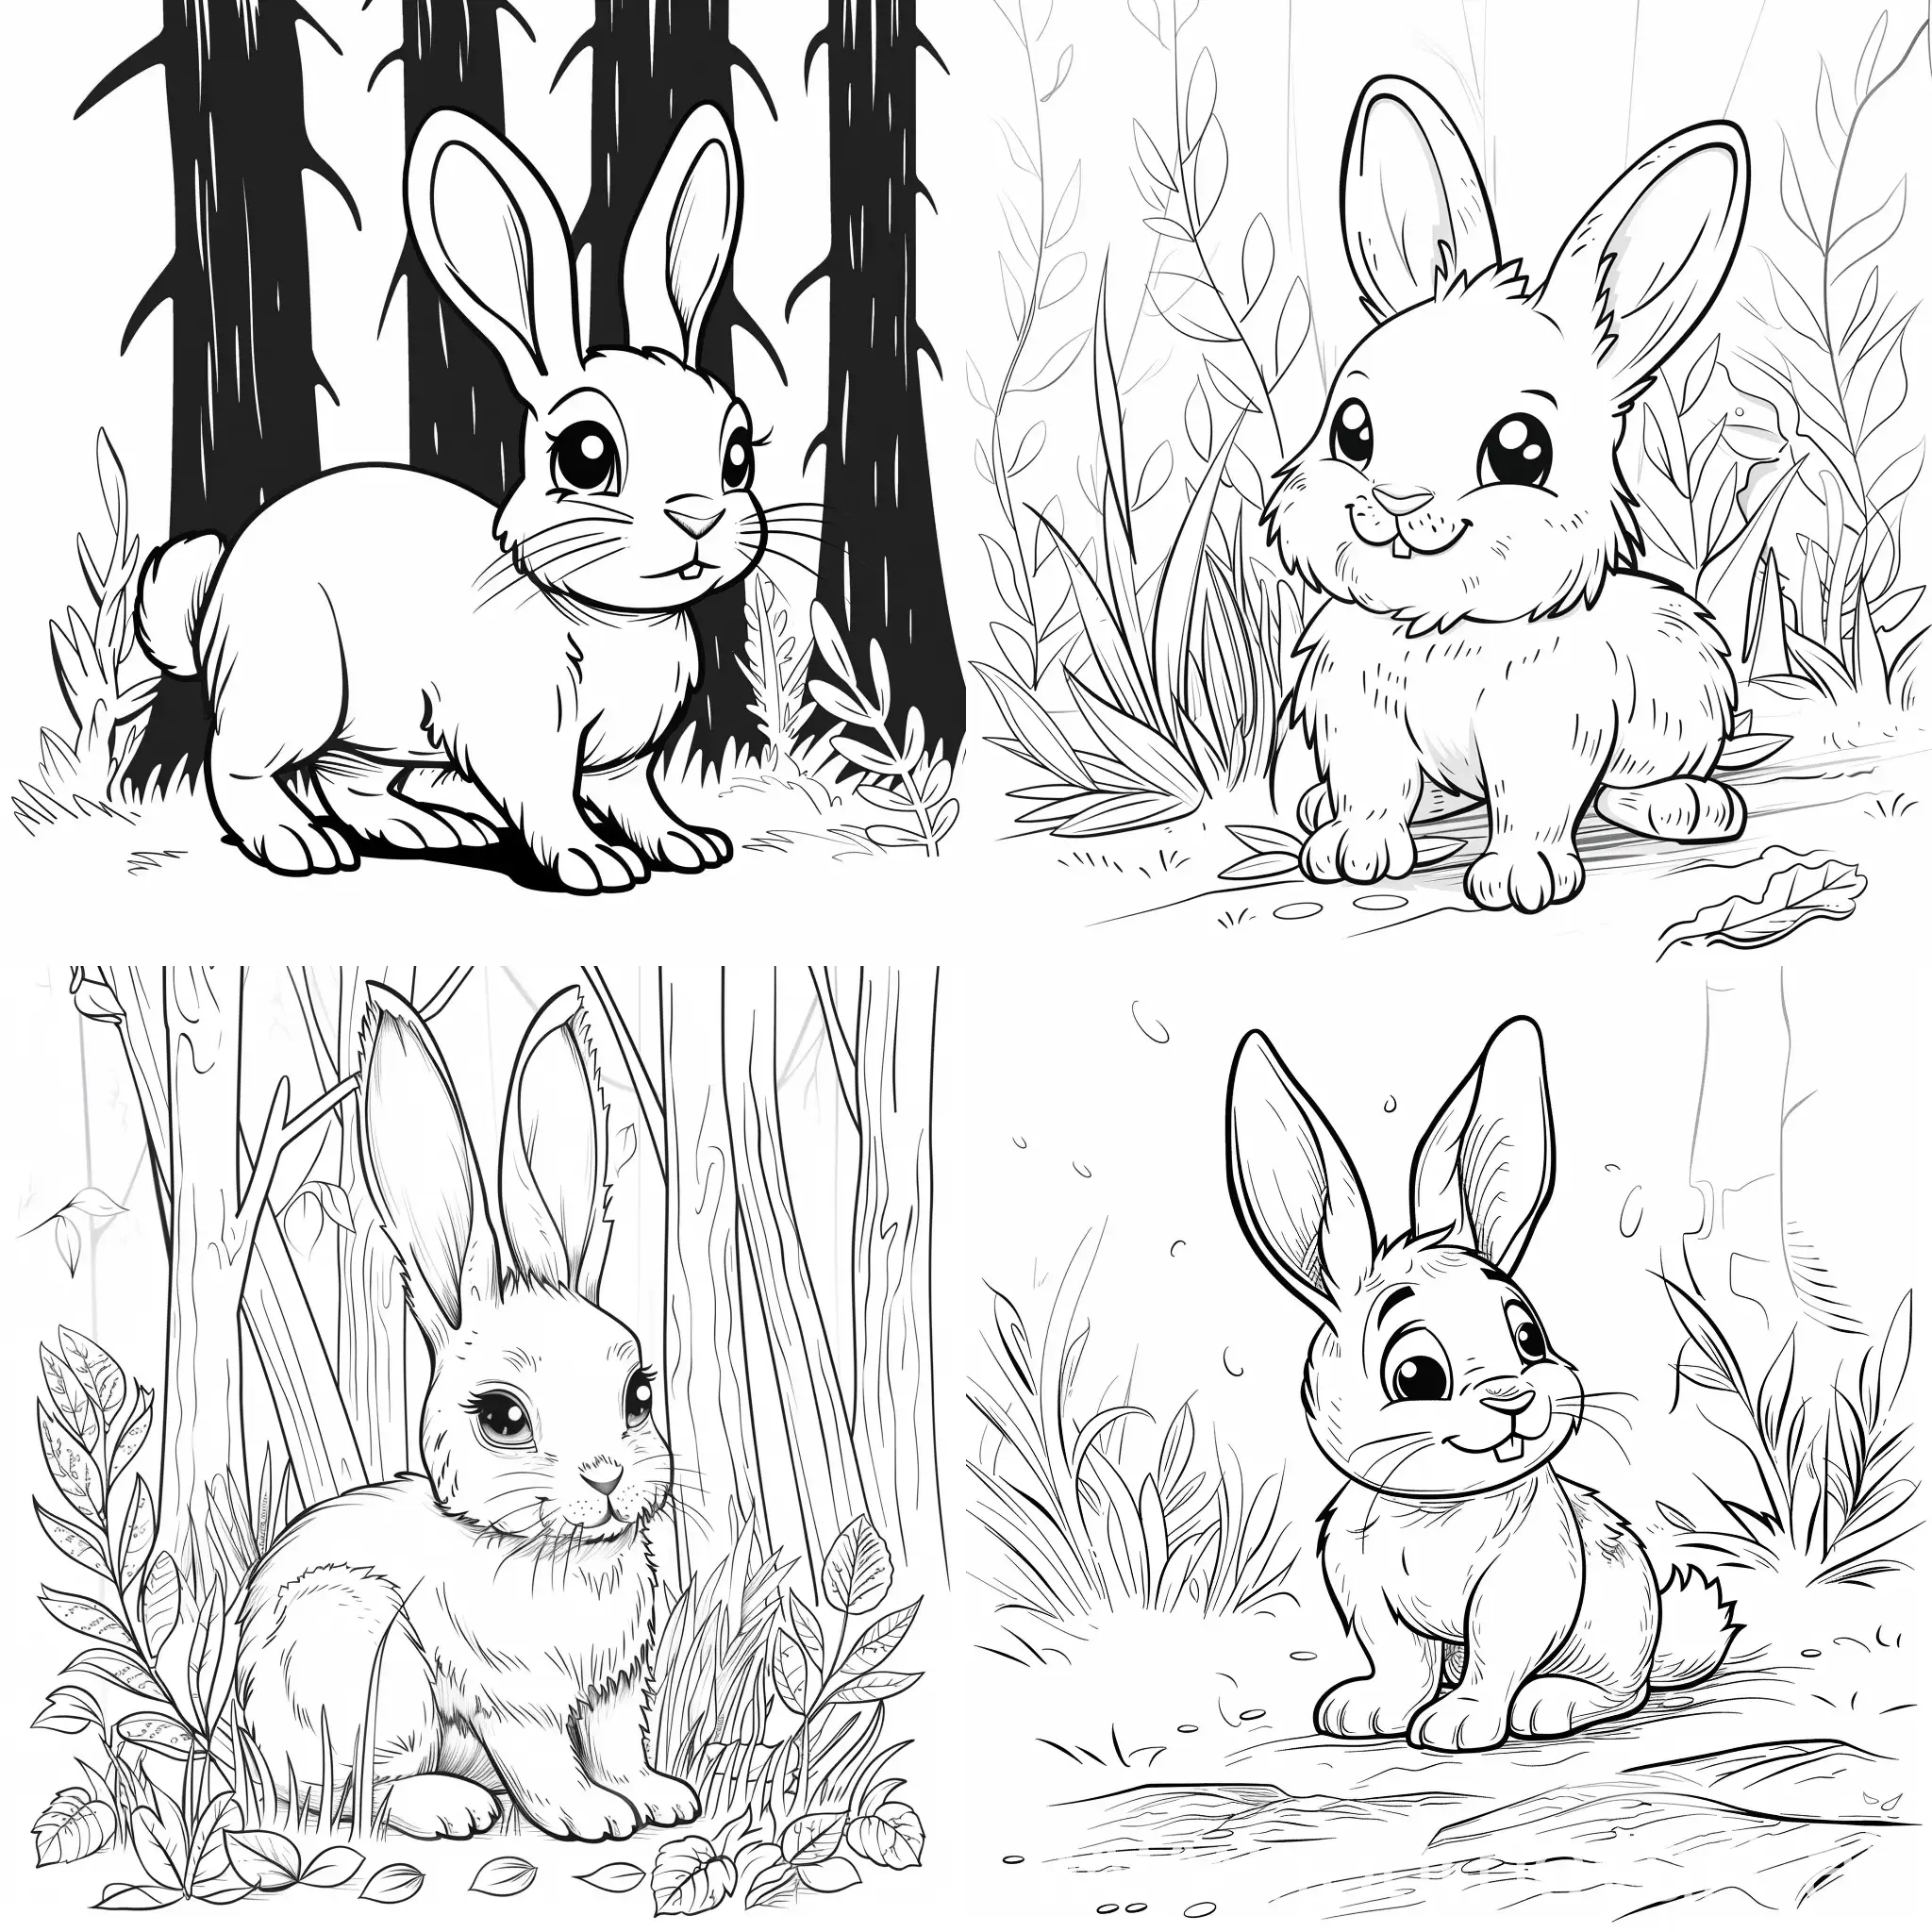 black and white cute rabbit for coloring book, in forest, for kids
